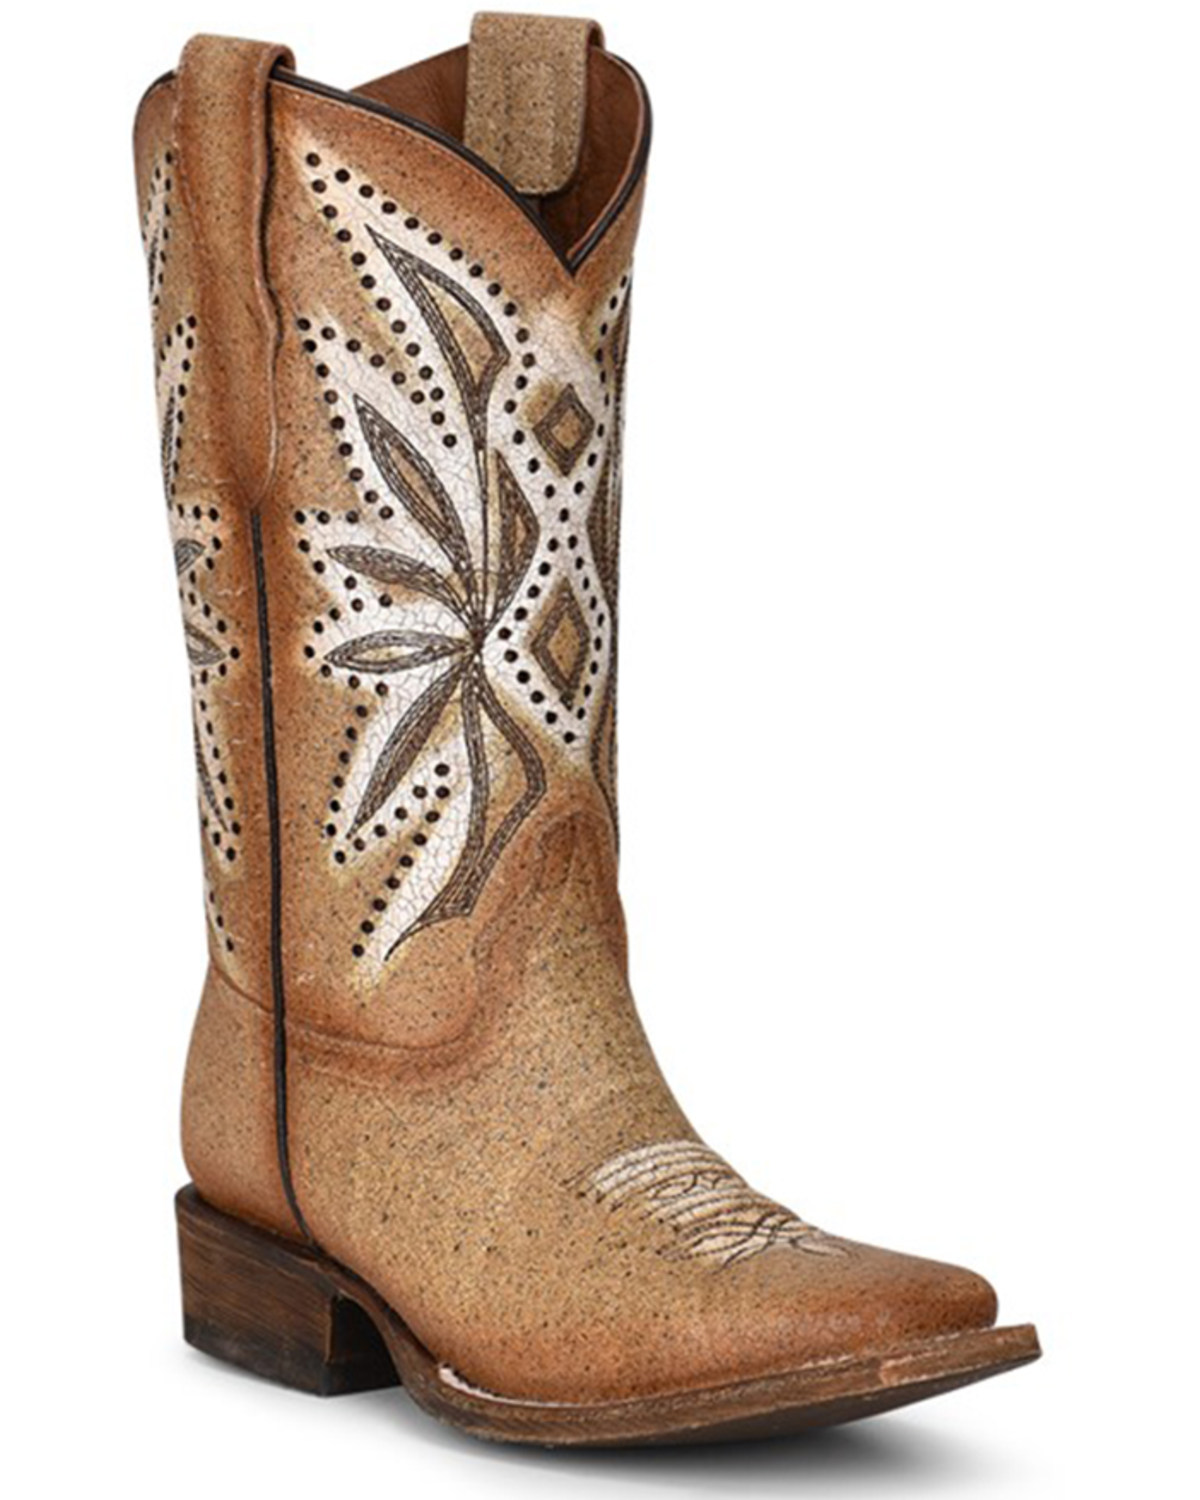 Corral Girls' Straw Embroidery Western Boots - Square Toe